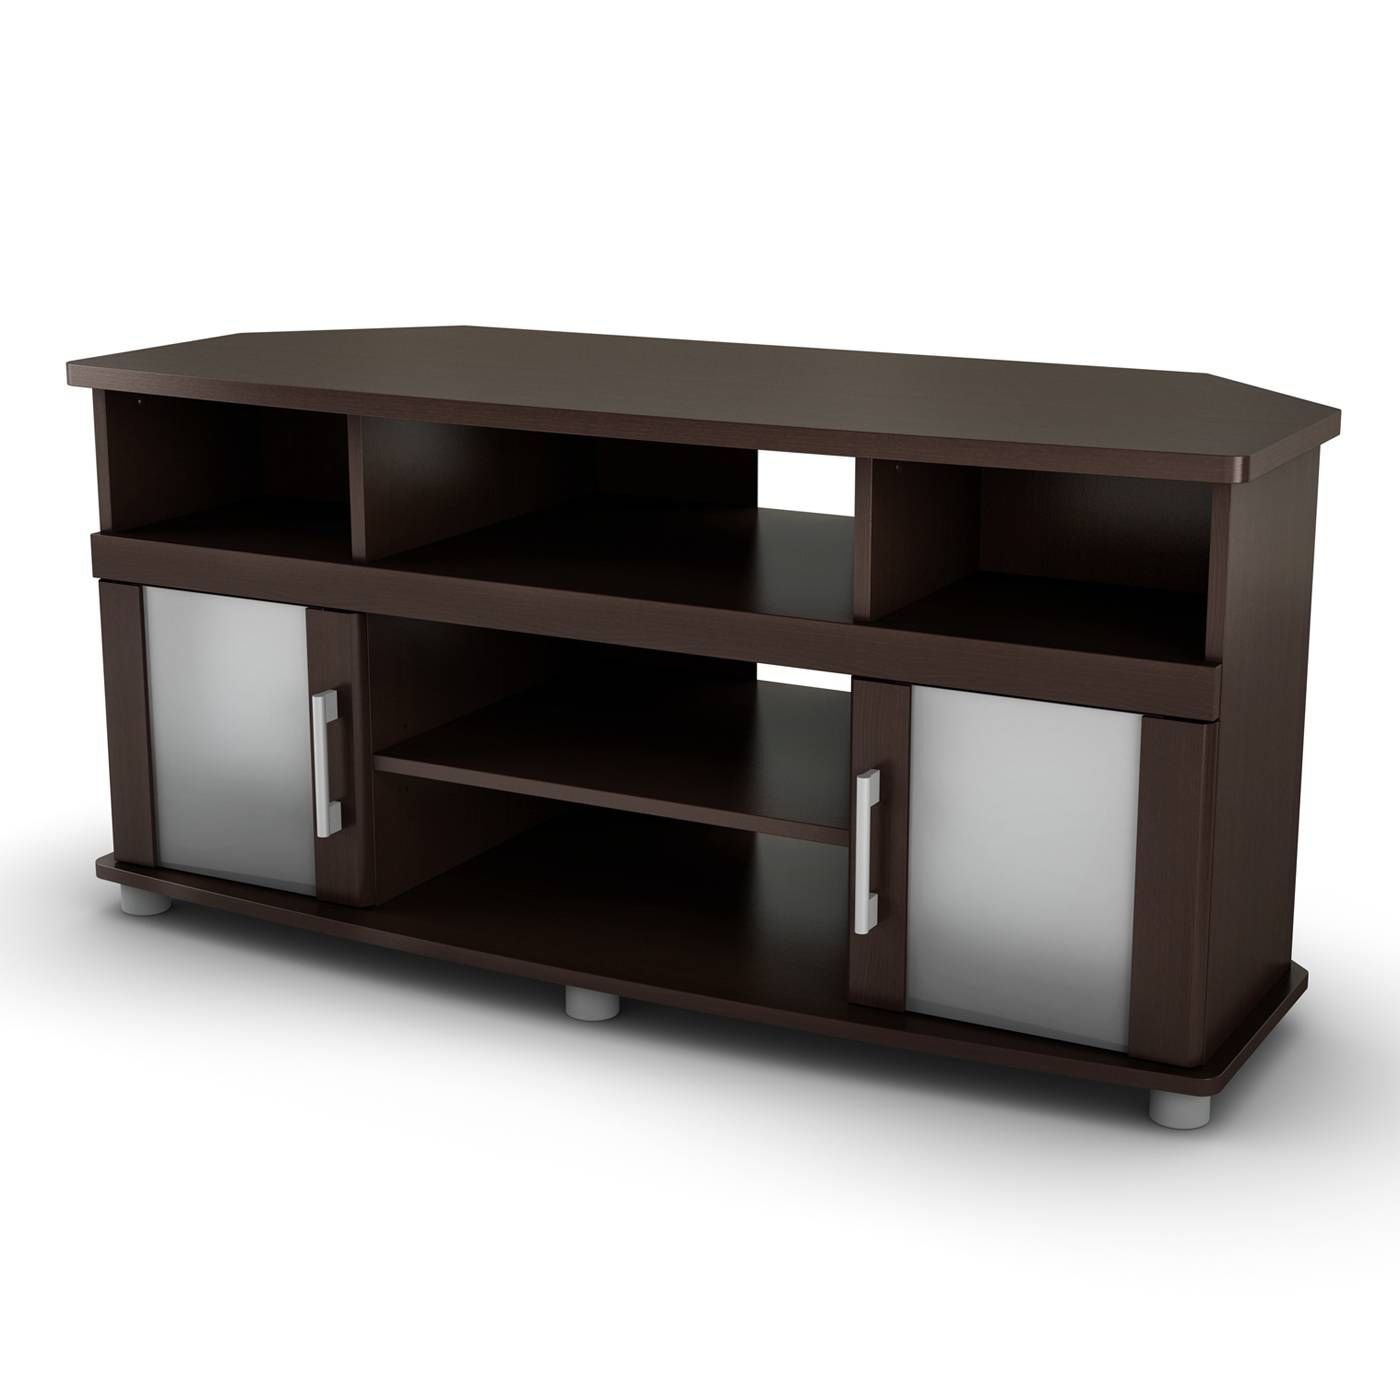 Tv Stands – Corner, Fireplace & More | Lowe's Canada Within Low Corner Tv Cabinets (View 7 of 15)